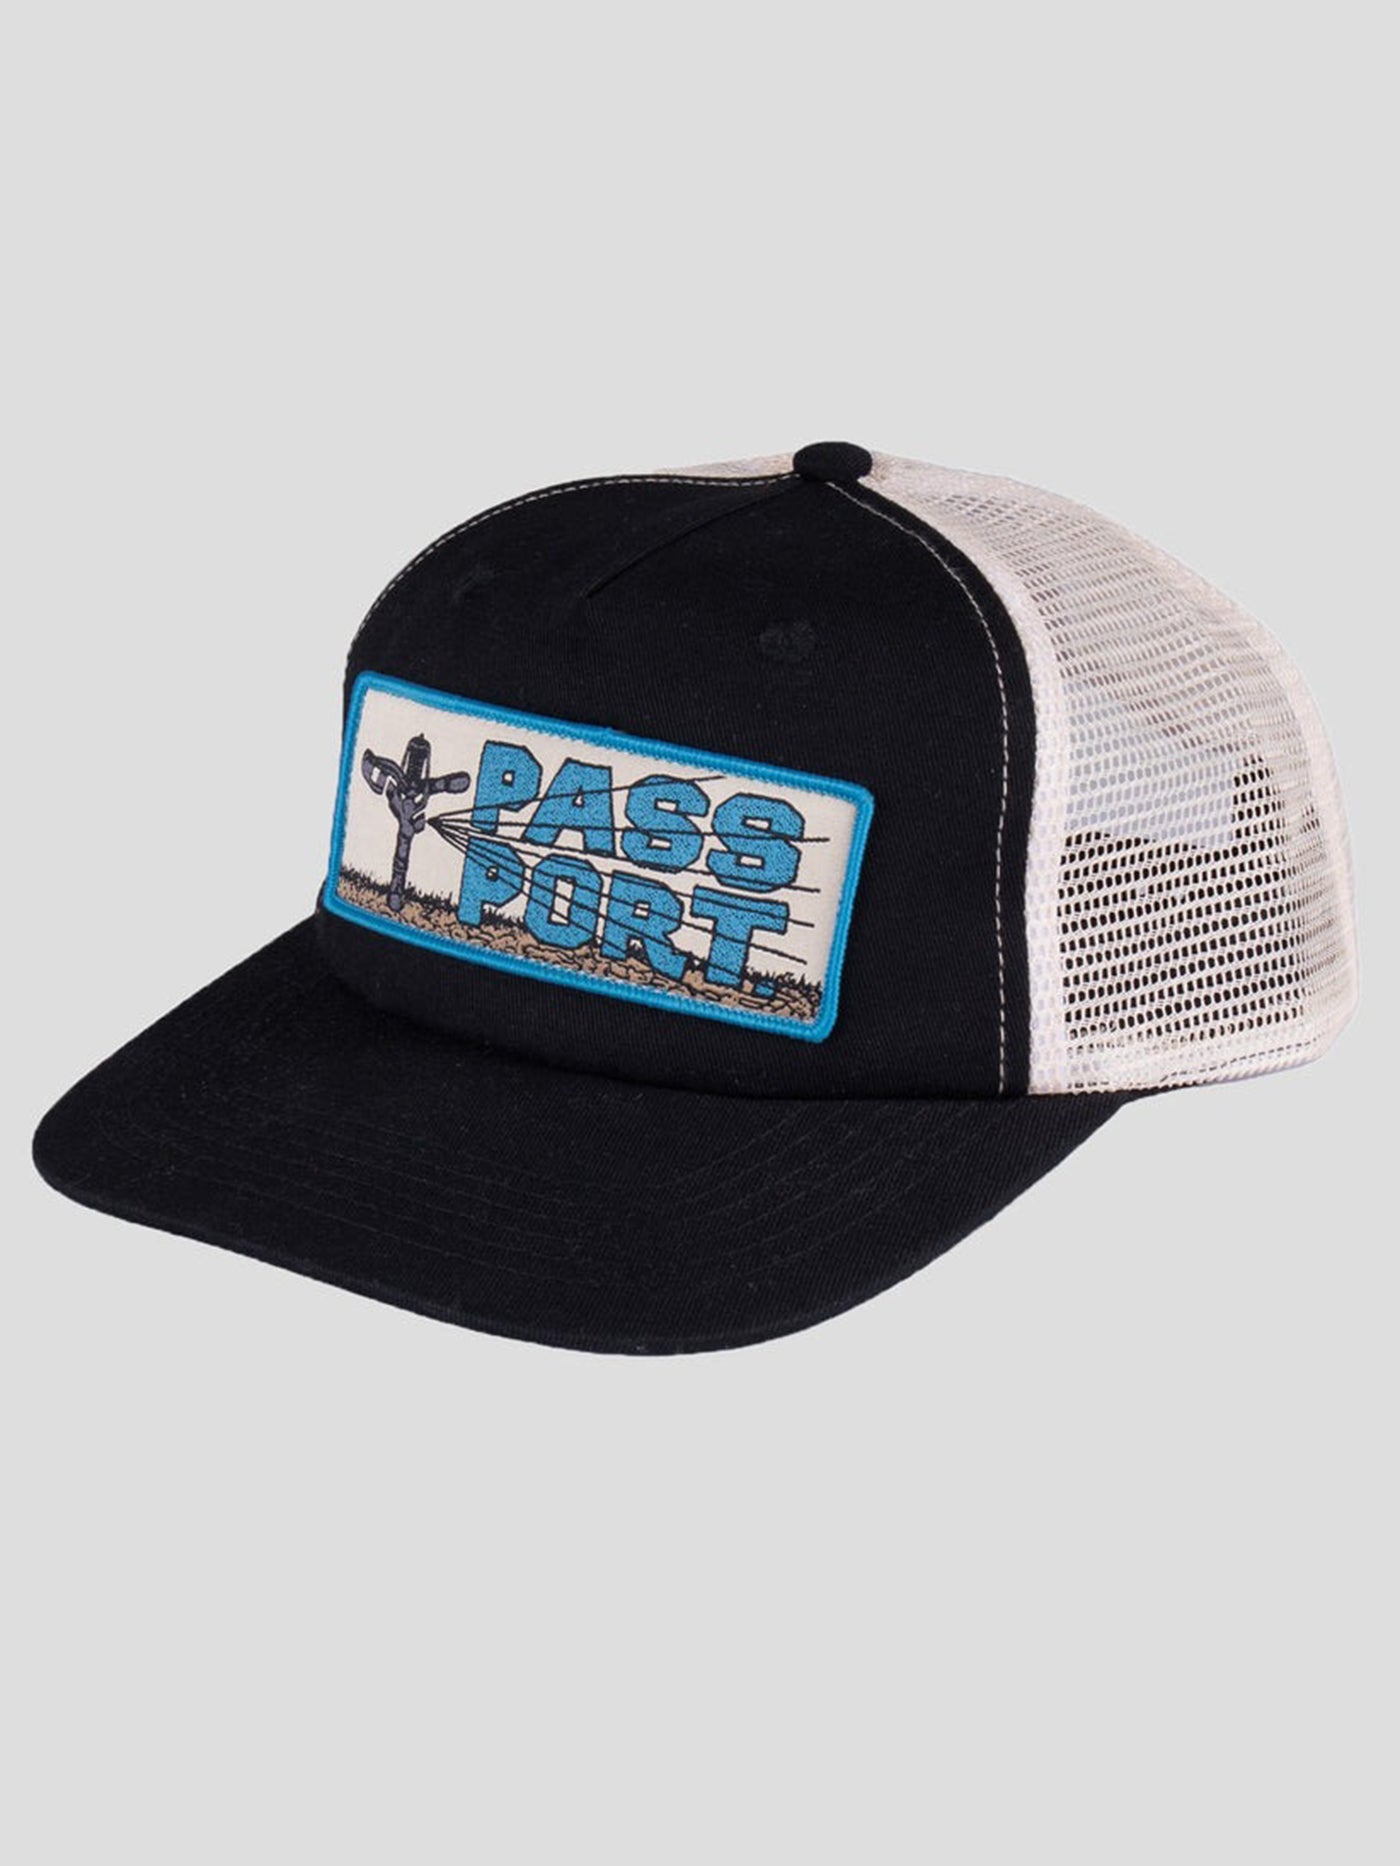 Pass Port Water Restrictions Workers Trucker Hat